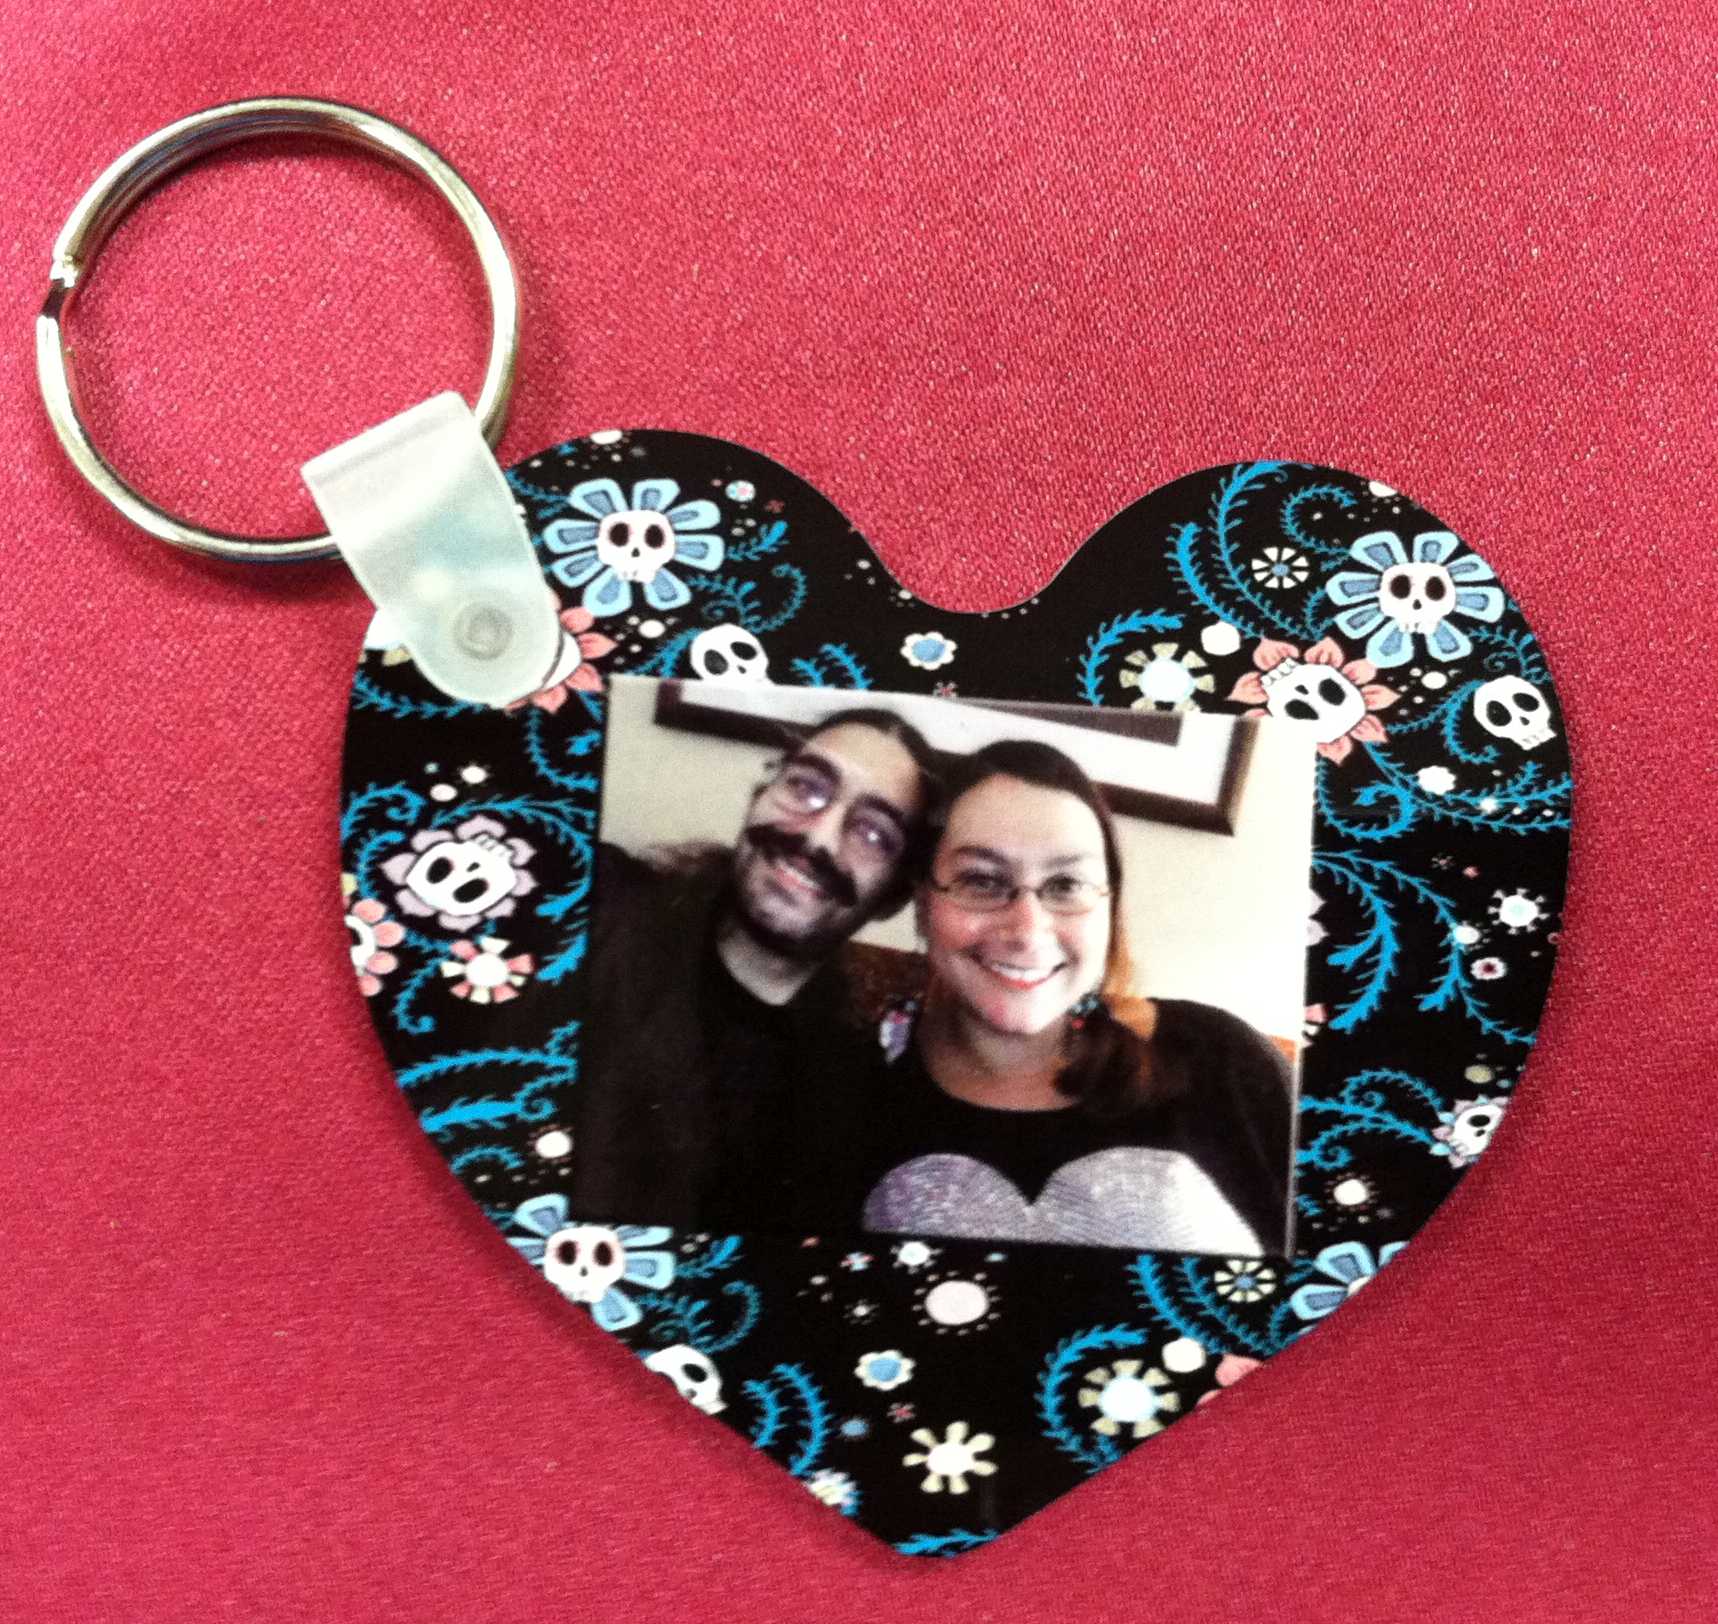 Anniversary Heart Key Tag made with sublimation printing